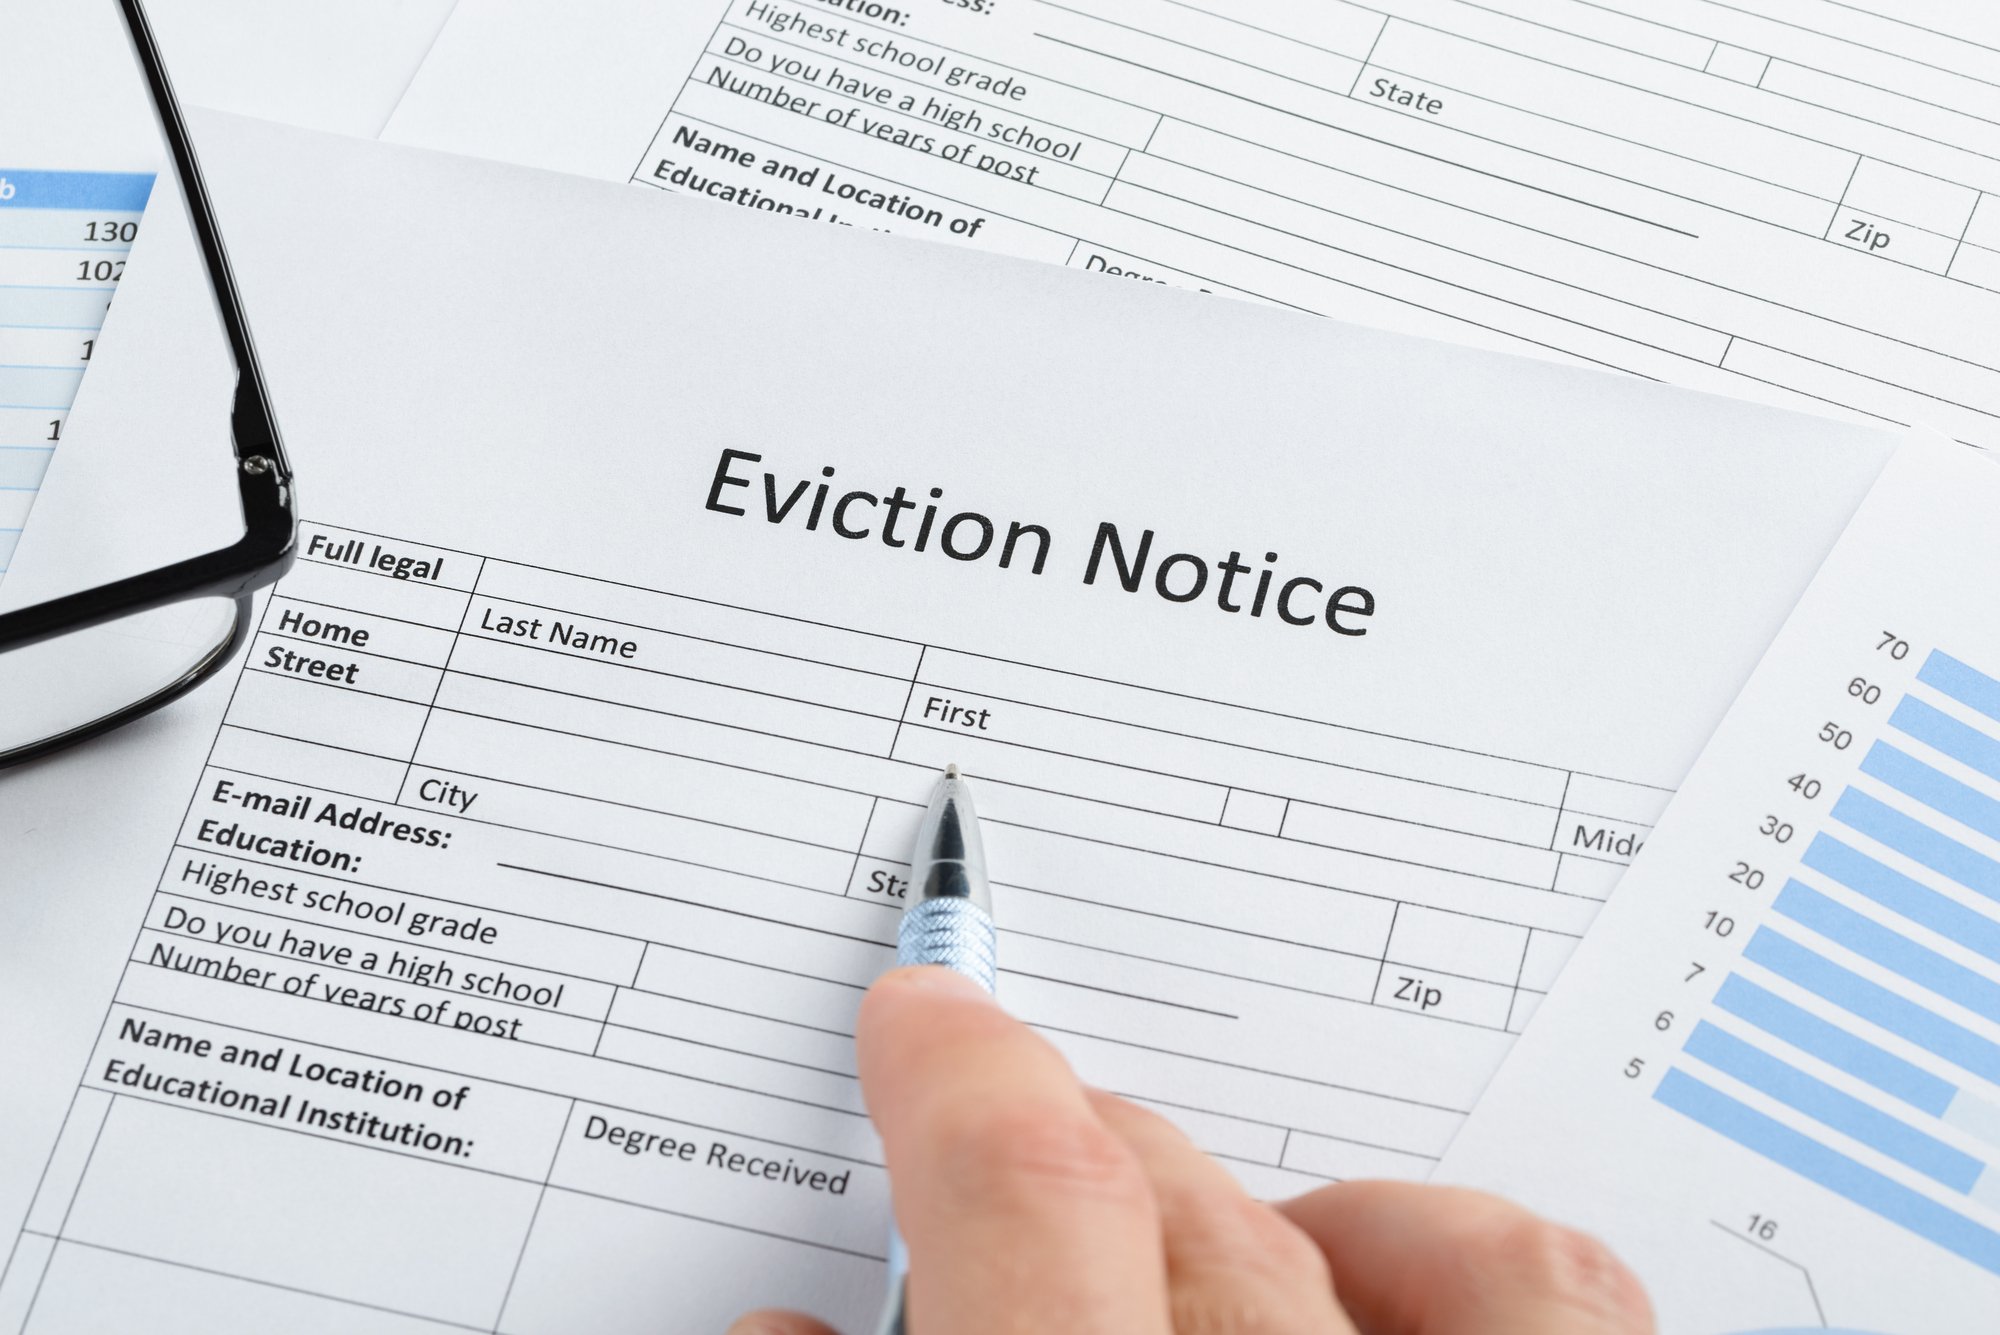 How to Evict a Tenant: Tips for the Worst From Hampton Property Management